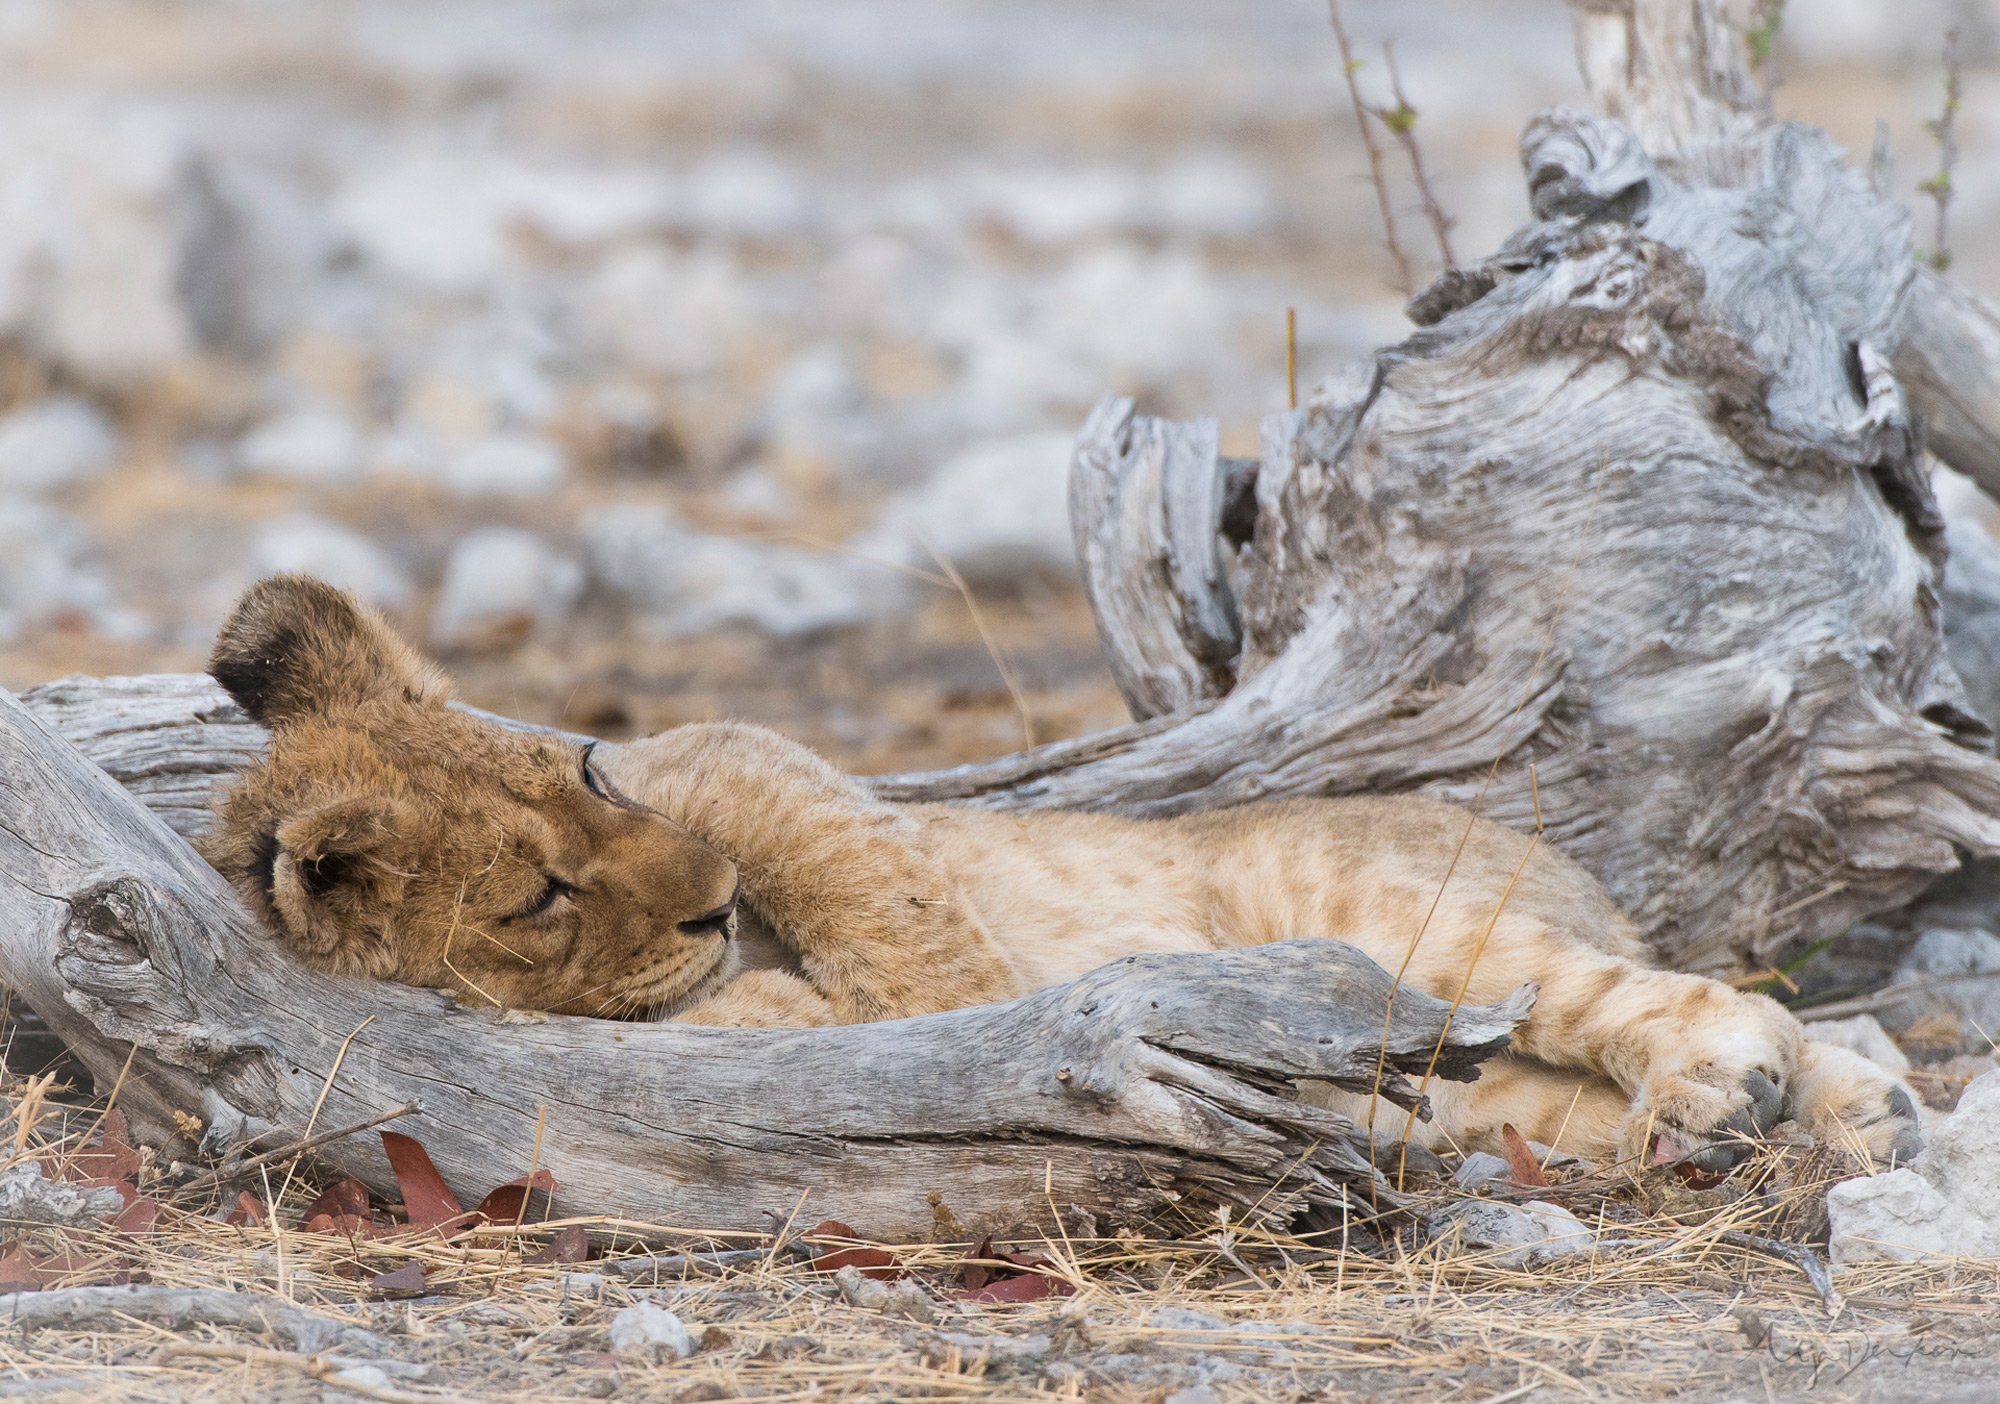 A lion cub fast asleep between the branches of a fallen tree, Etosha National Park, Namibia